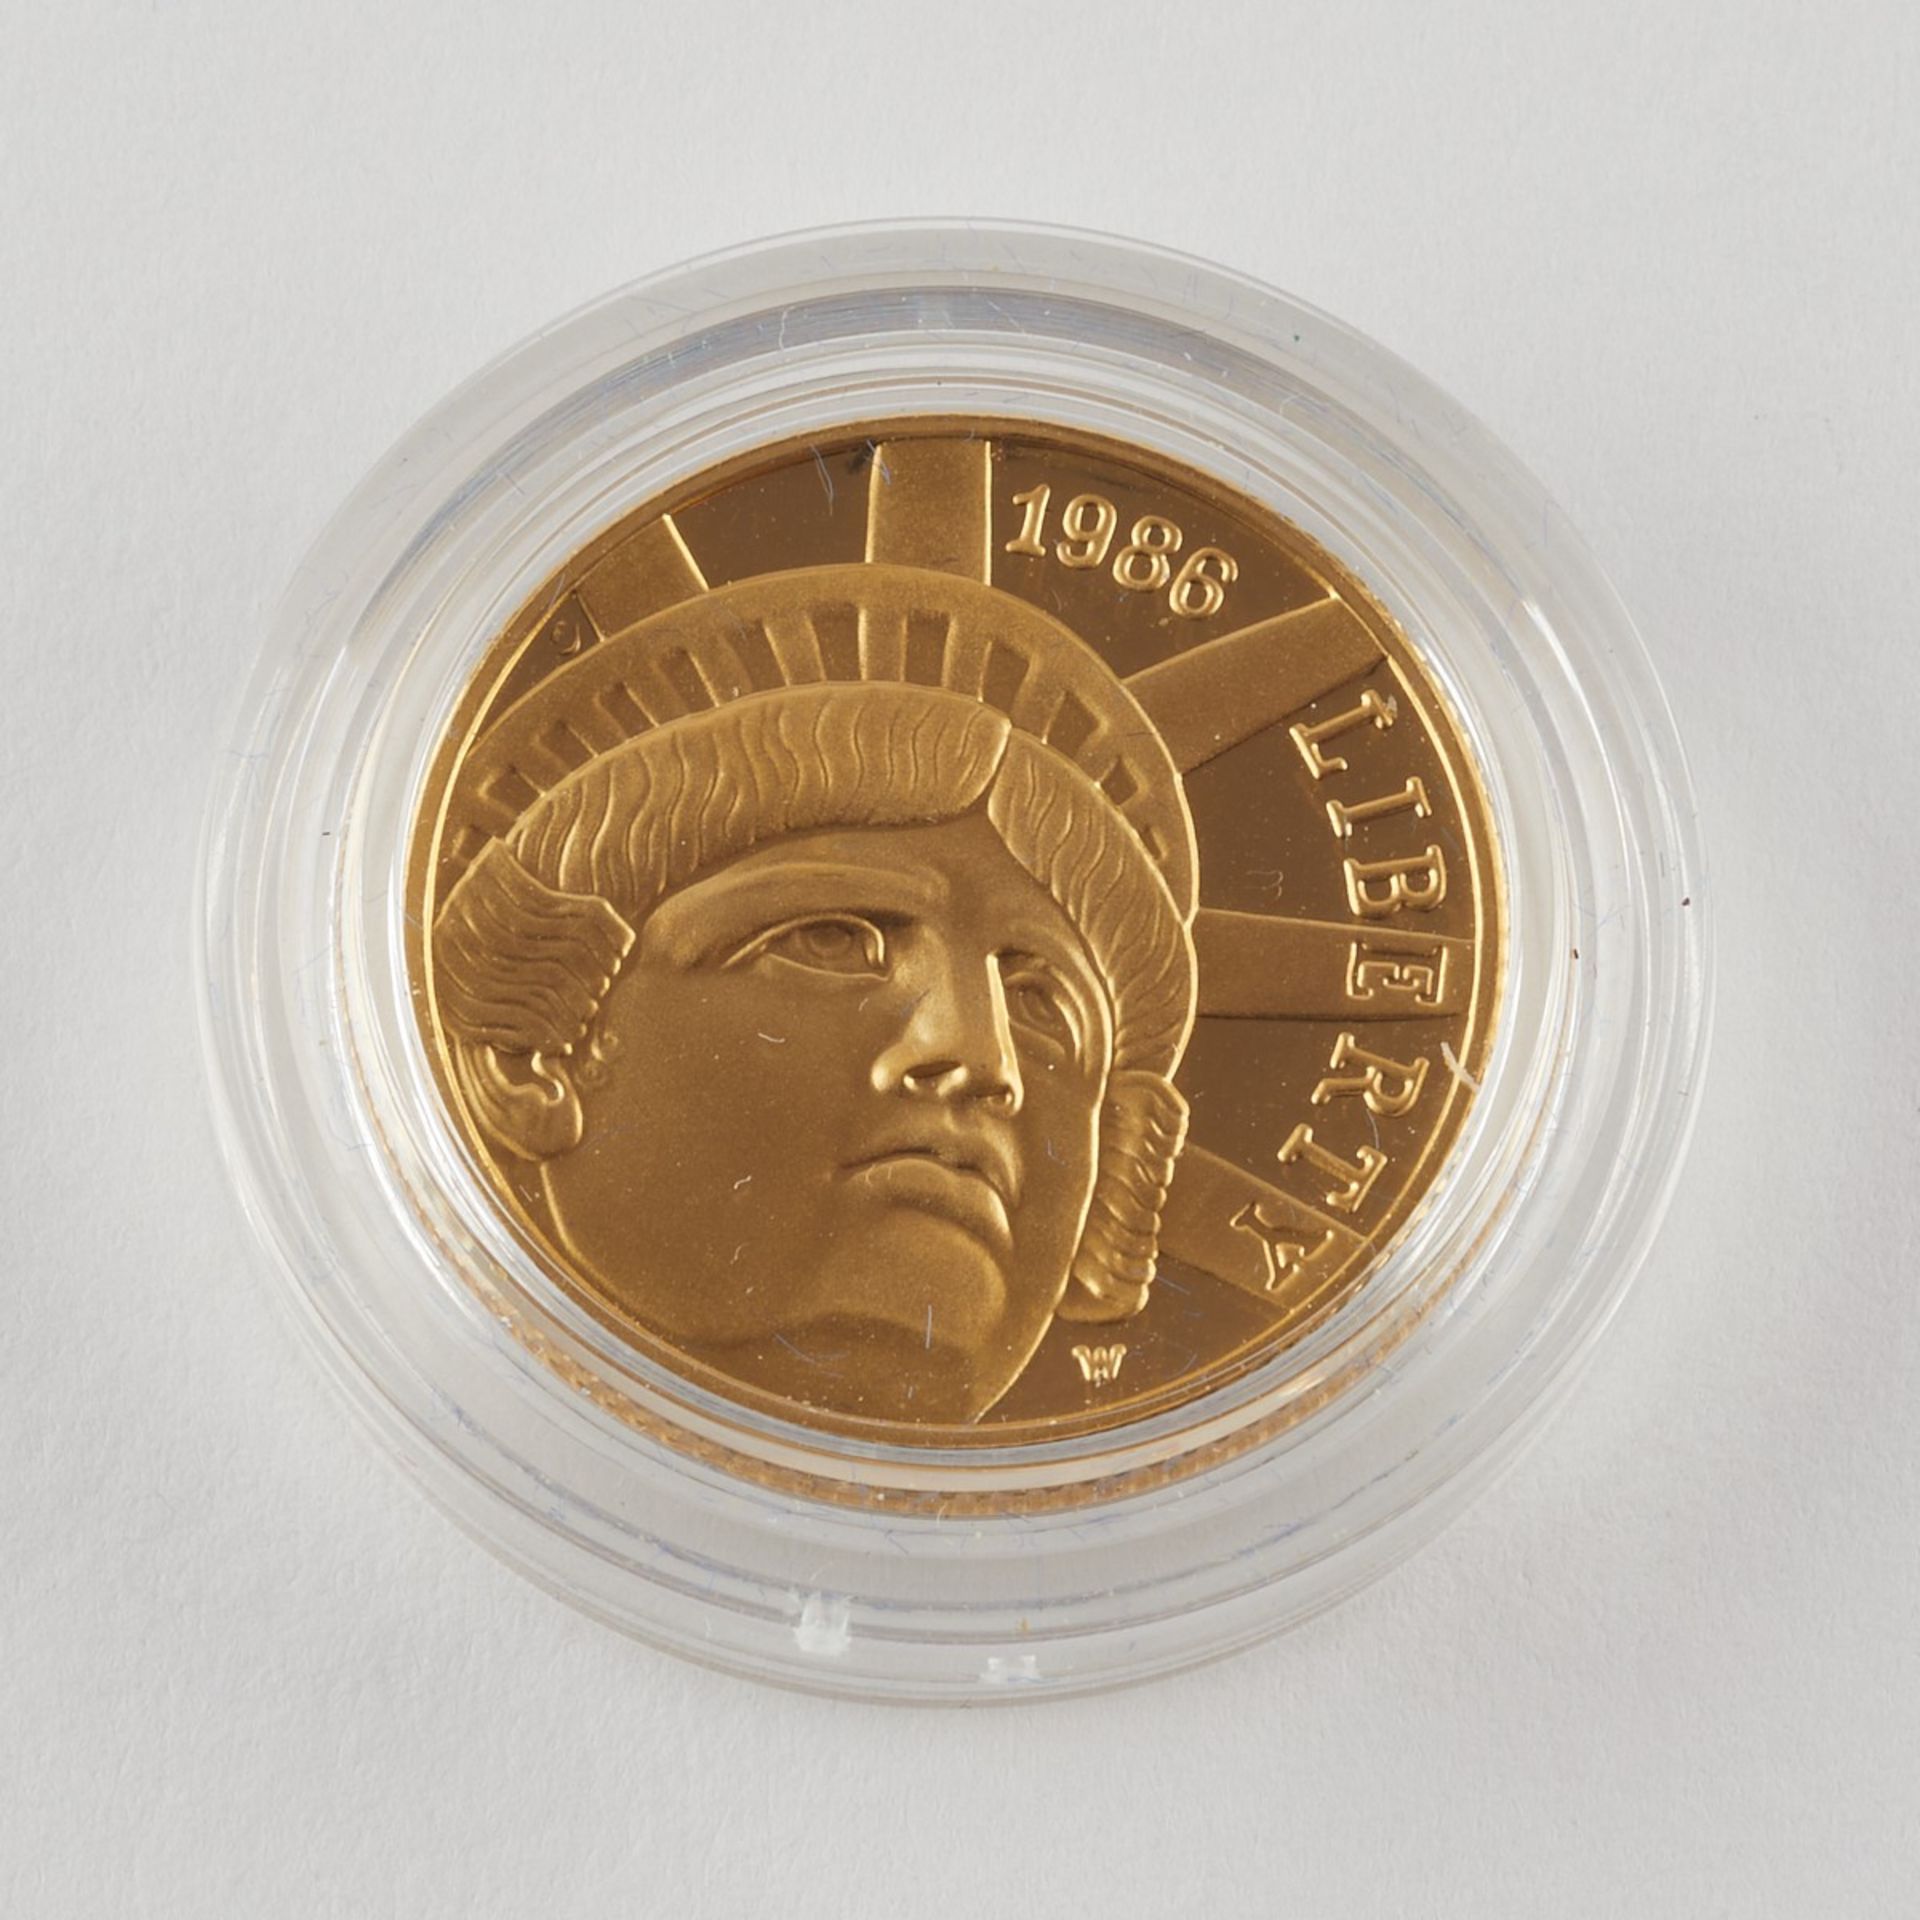 3 Sets of United States Commemorative Coins - Image 8 of 8